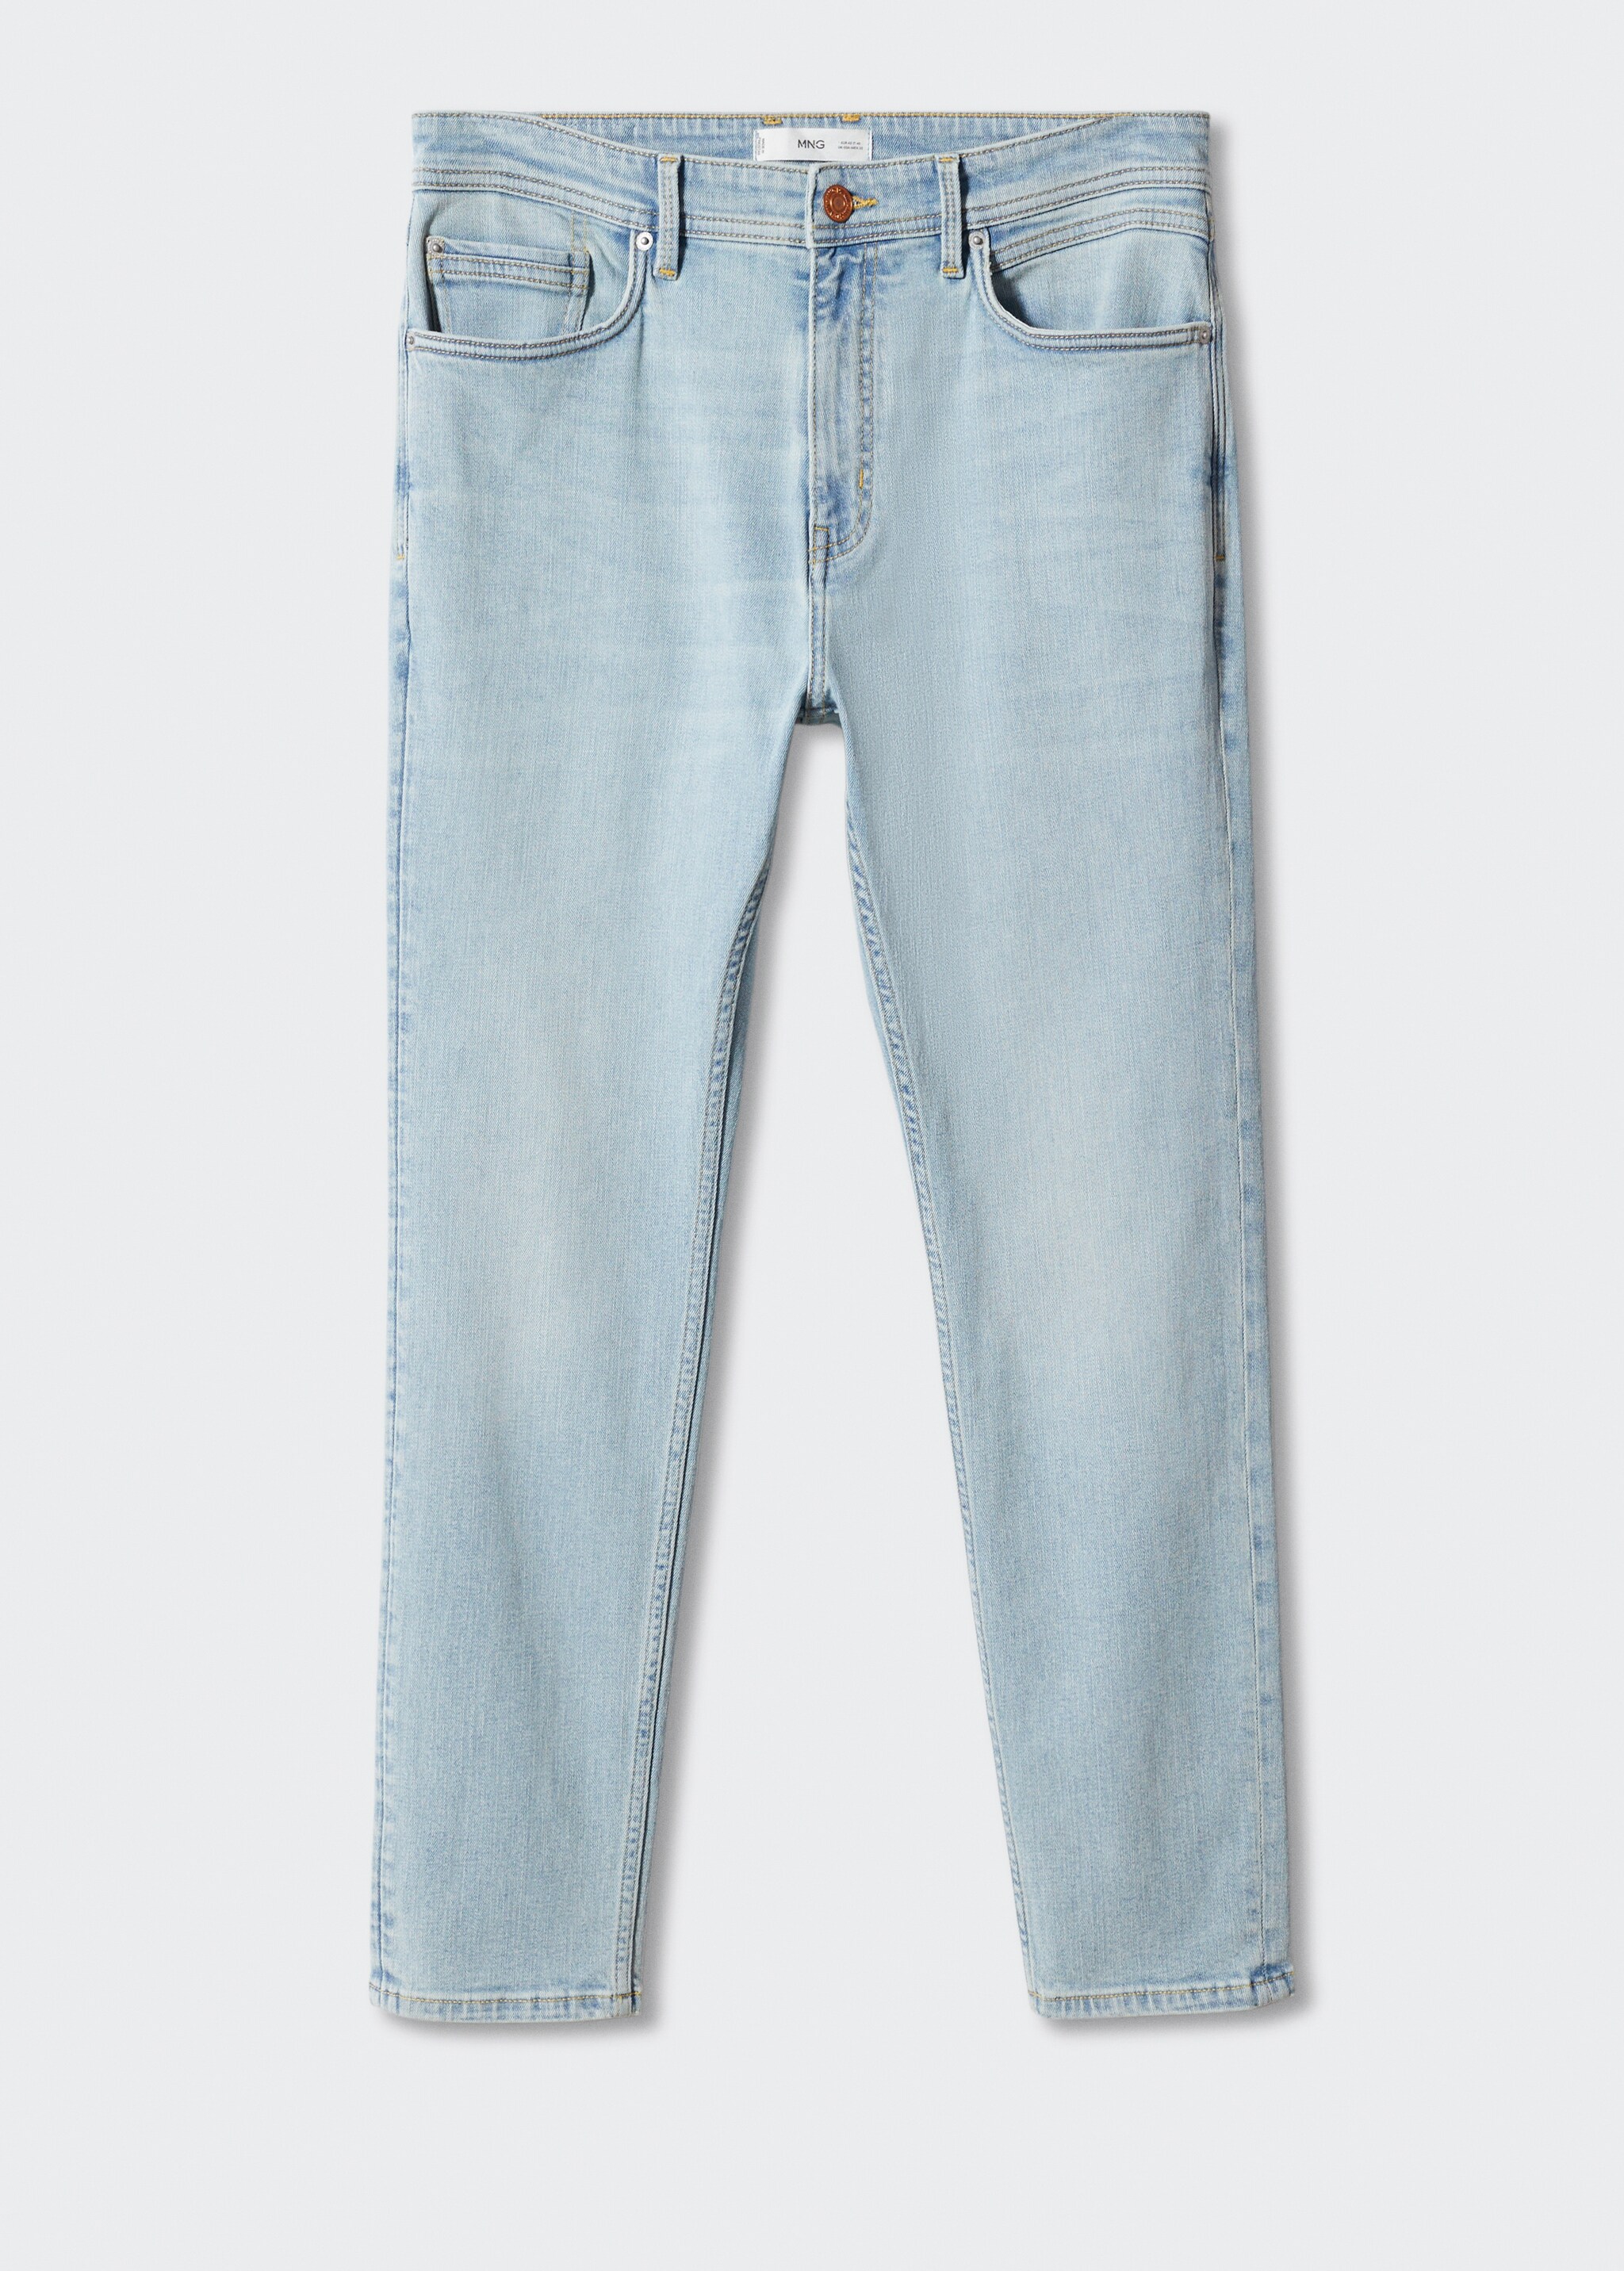 Jean Tom tapered cropped - Article sans modèle